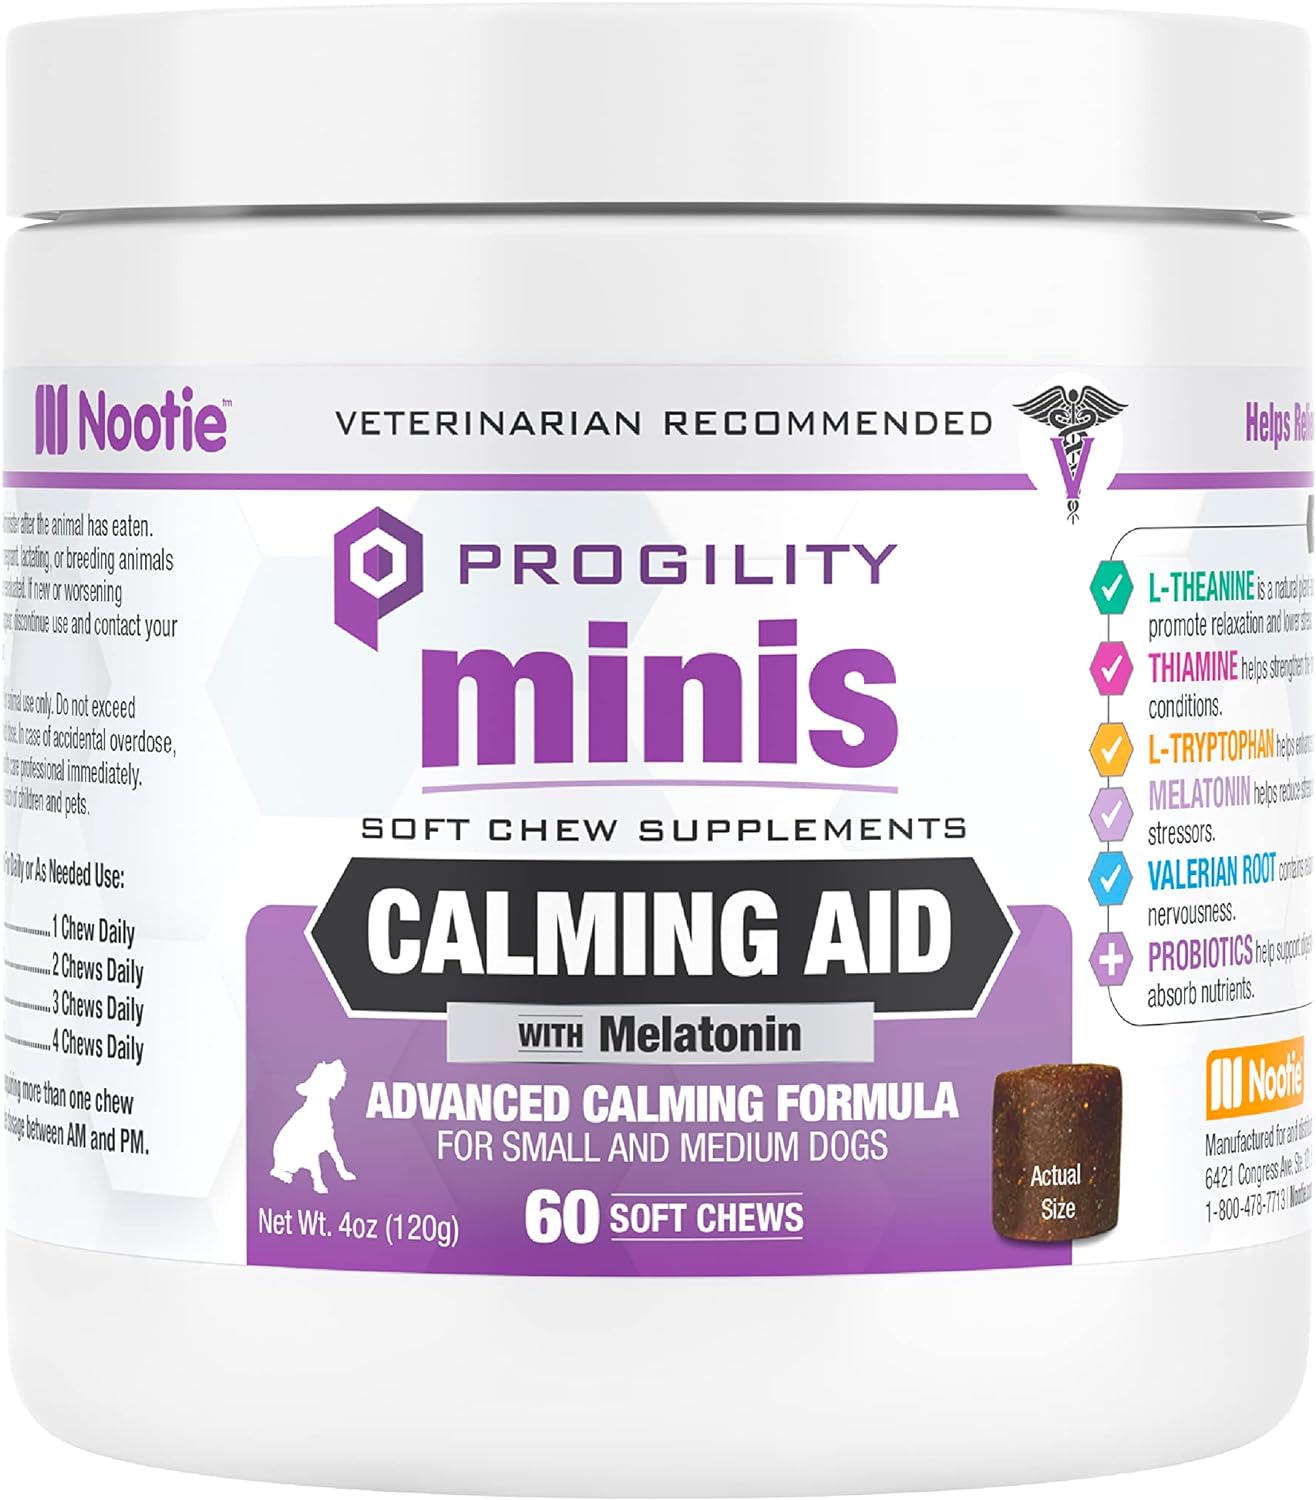 Nootie Progility Mini Calming Aid, Calming Chews for Dogs for Stress and Anxiety Relief, 60 Soft Chews per Container